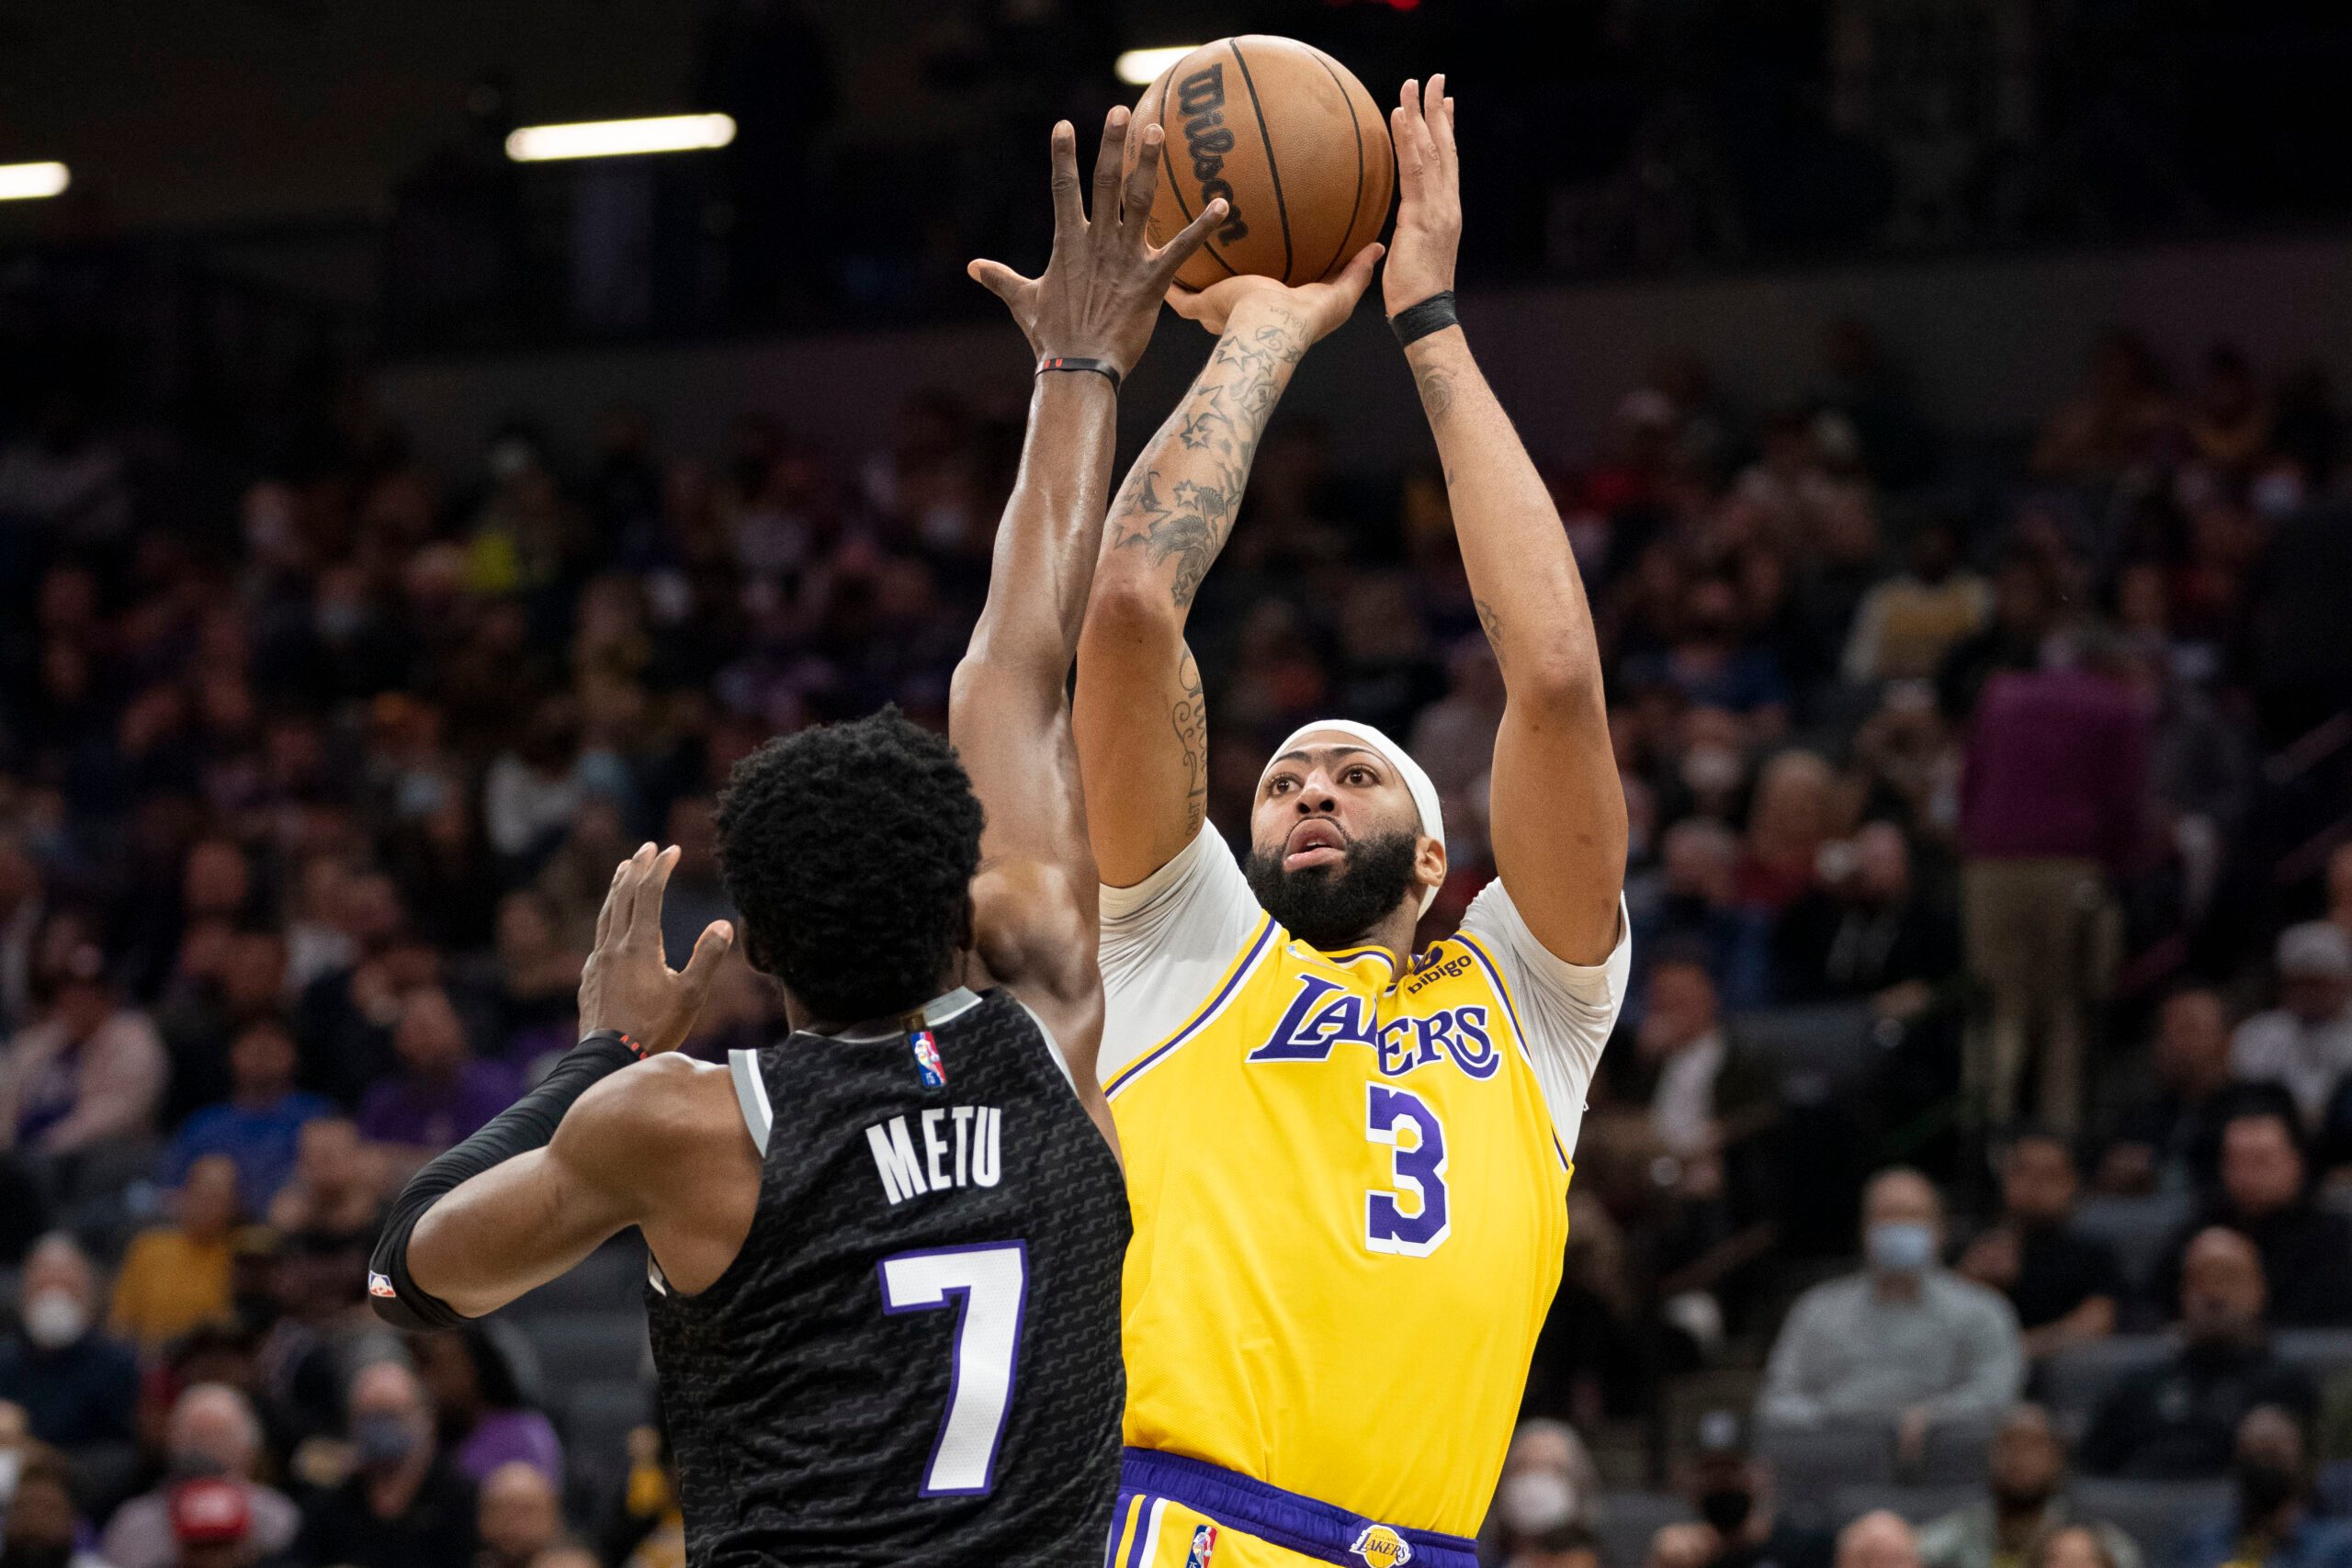 Playing without LeBron James, Lakers still punish Kings